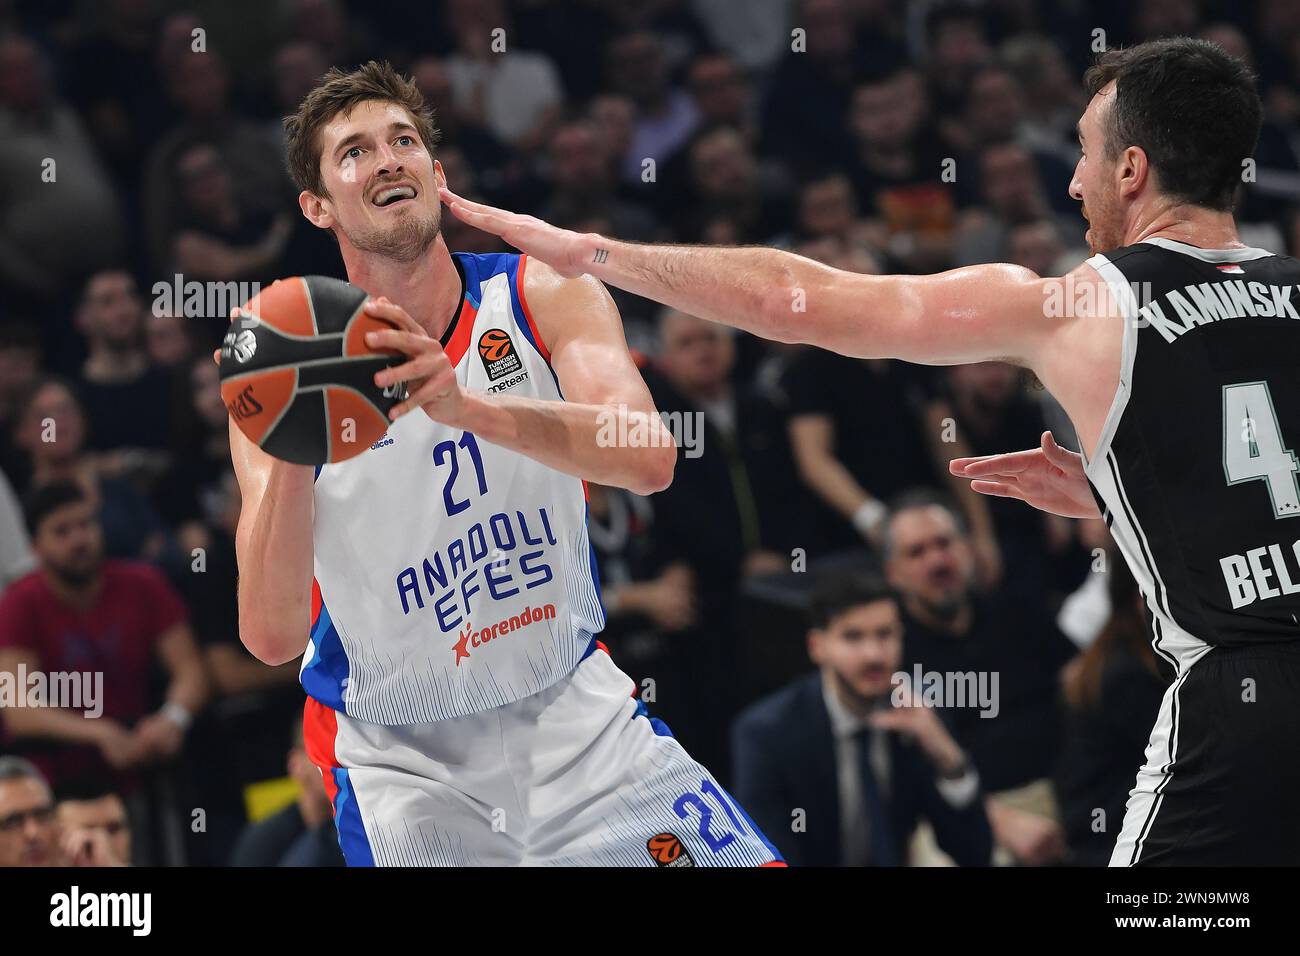 Belgrade, Serbia, 29 February, 2023. Tibor Pleiss of Anadolu Efes Istanbul in action during the 2023/2024 Turkish Airlines EuroLeague, Round 27 match between Partizan Mozzart Bet Belgrade and Anadolu Efes Istanbul at Stark Arena in Belgrade, Serbia. February 29, 2023. Credit: Nikola Krstic/Alamy Stock Photo